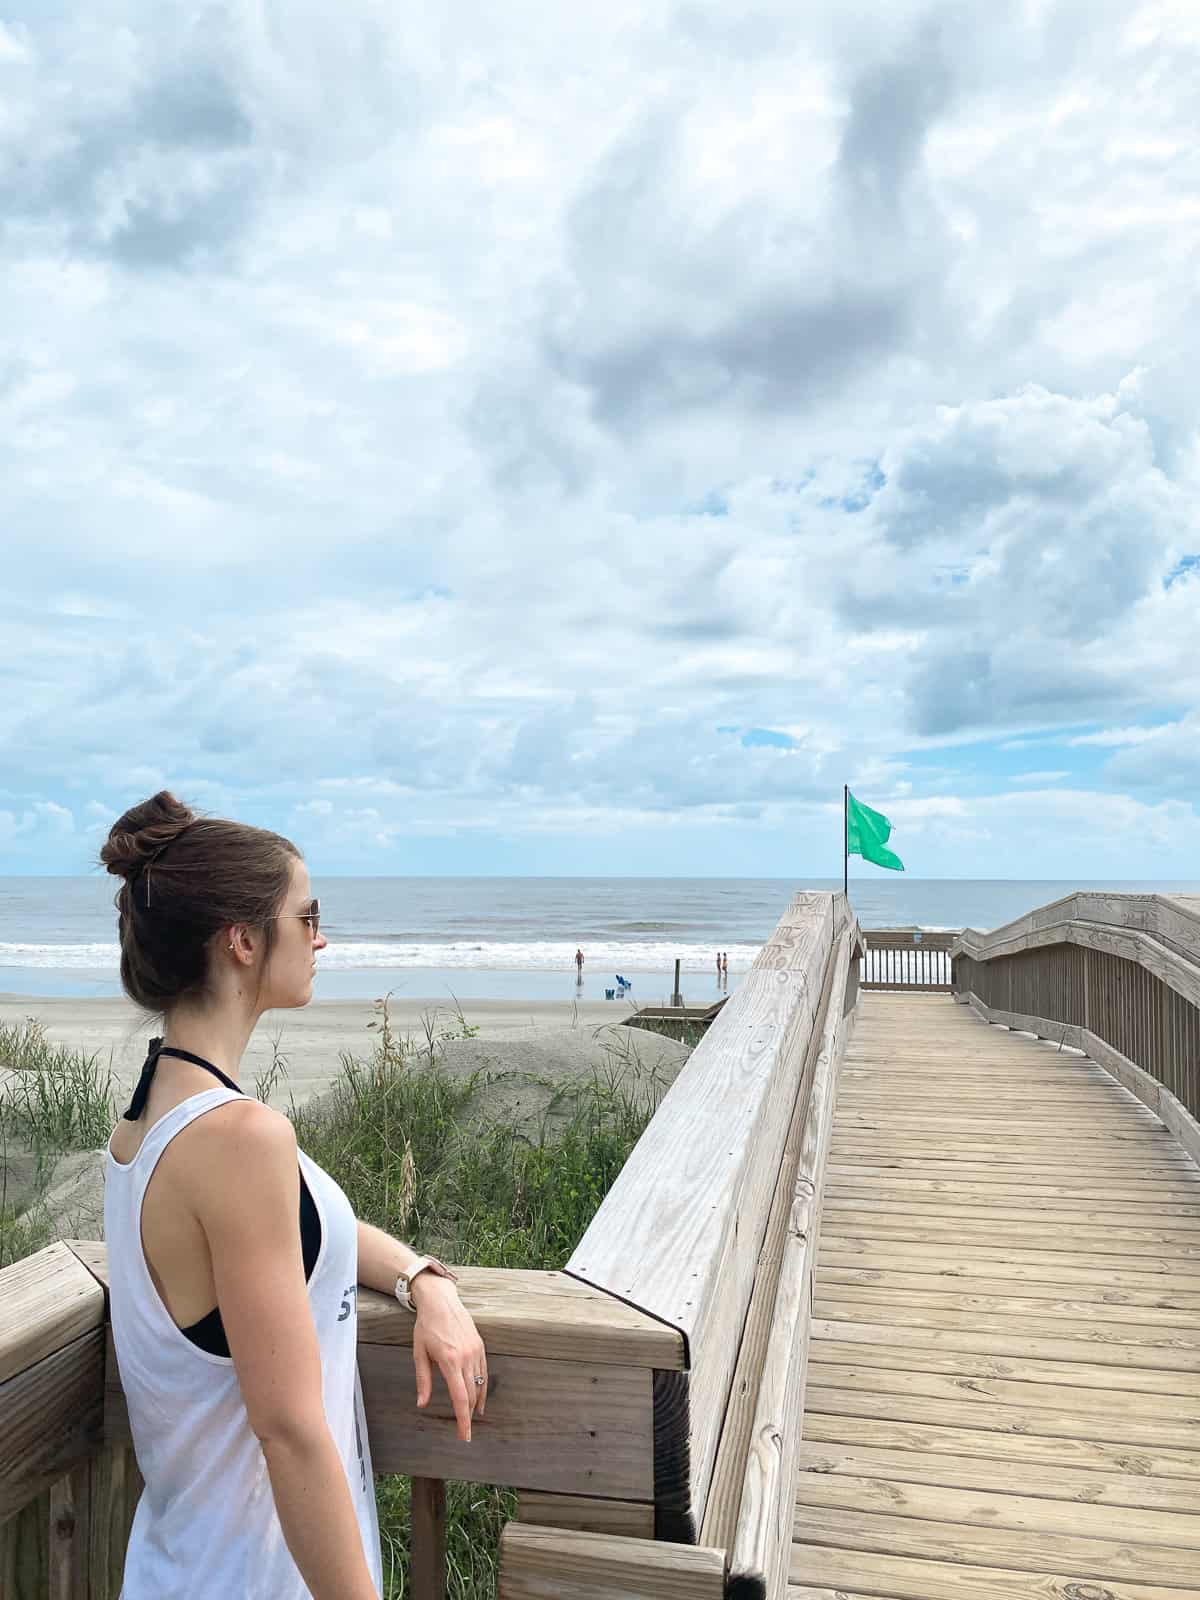 A woman with brown hair overlooking a boardwalk on a sunny beach in North Carolina